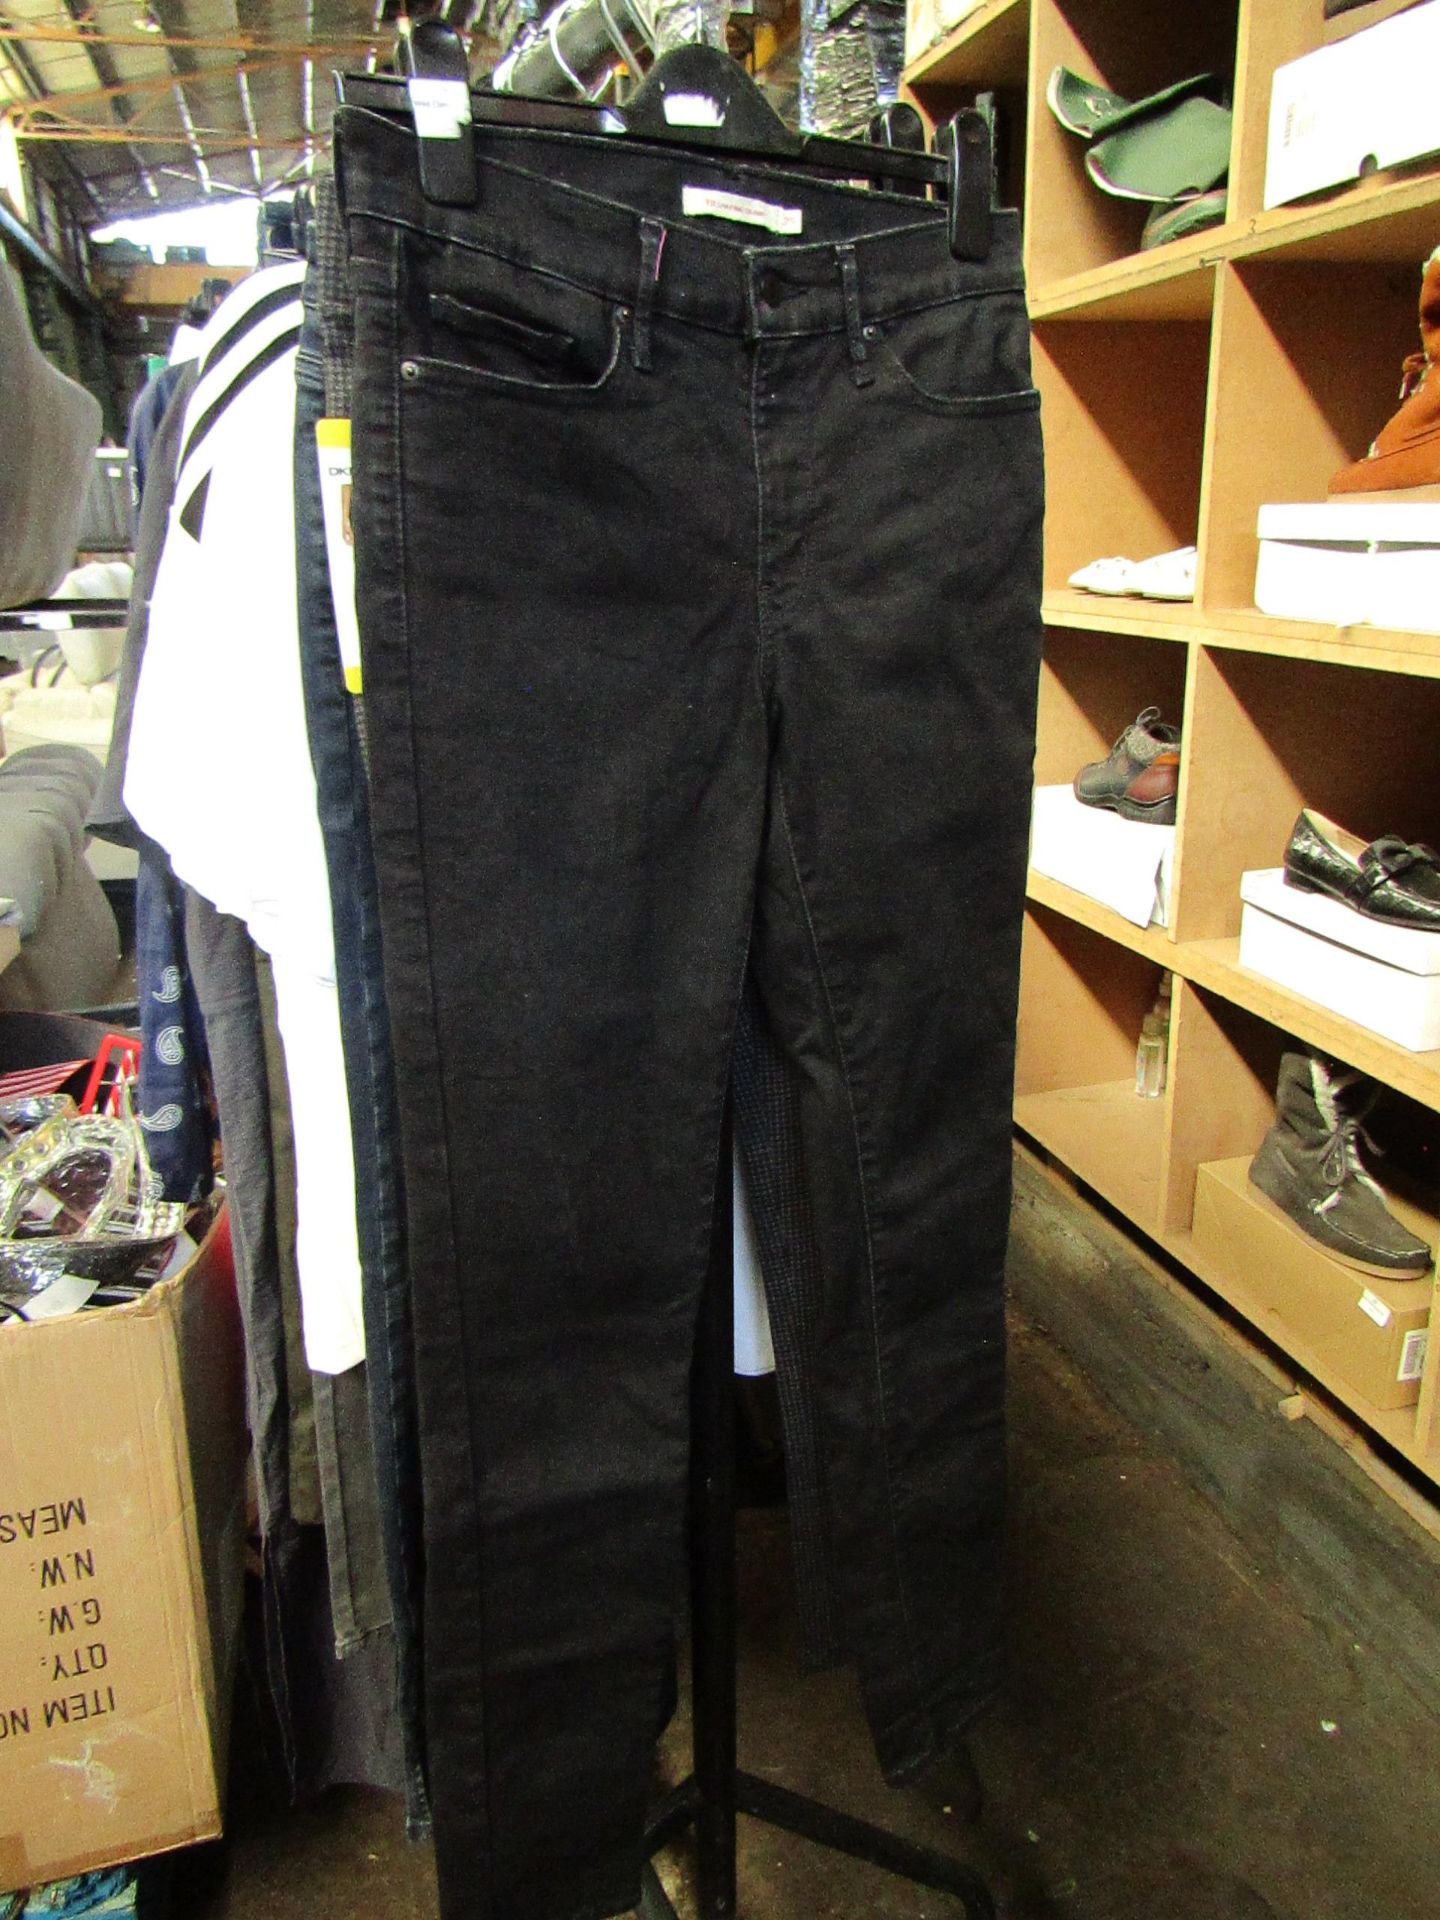 Levi311 Shaping Skinny jeans, size 29W, look to have been used and has a couple of marks on them but